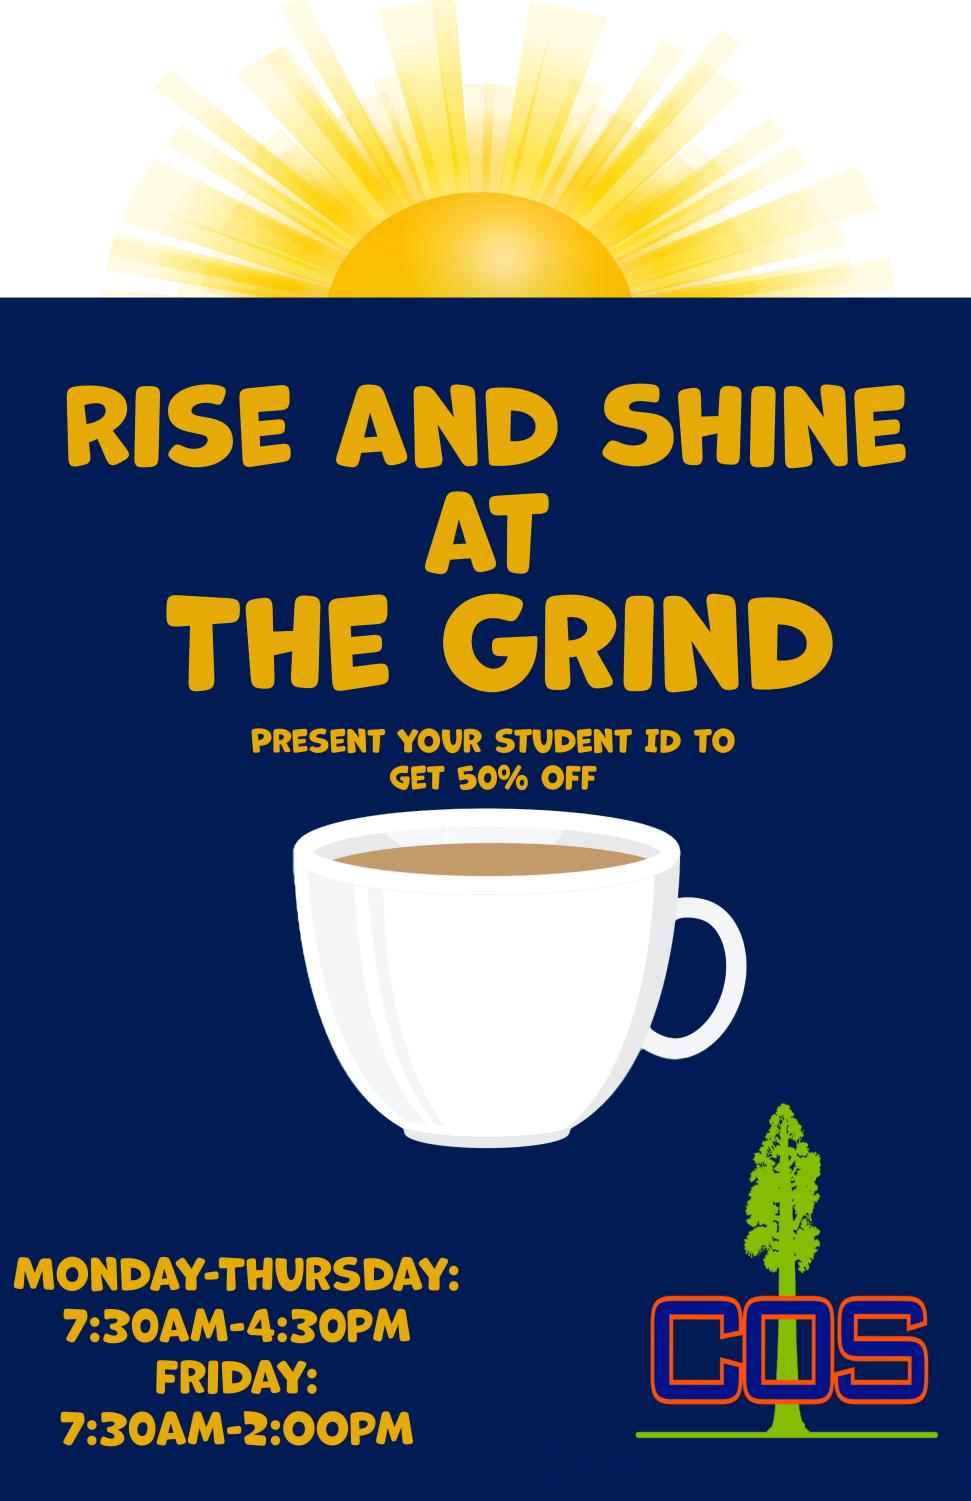 To-Go Coffee Cups  Rise and Shine (gold)